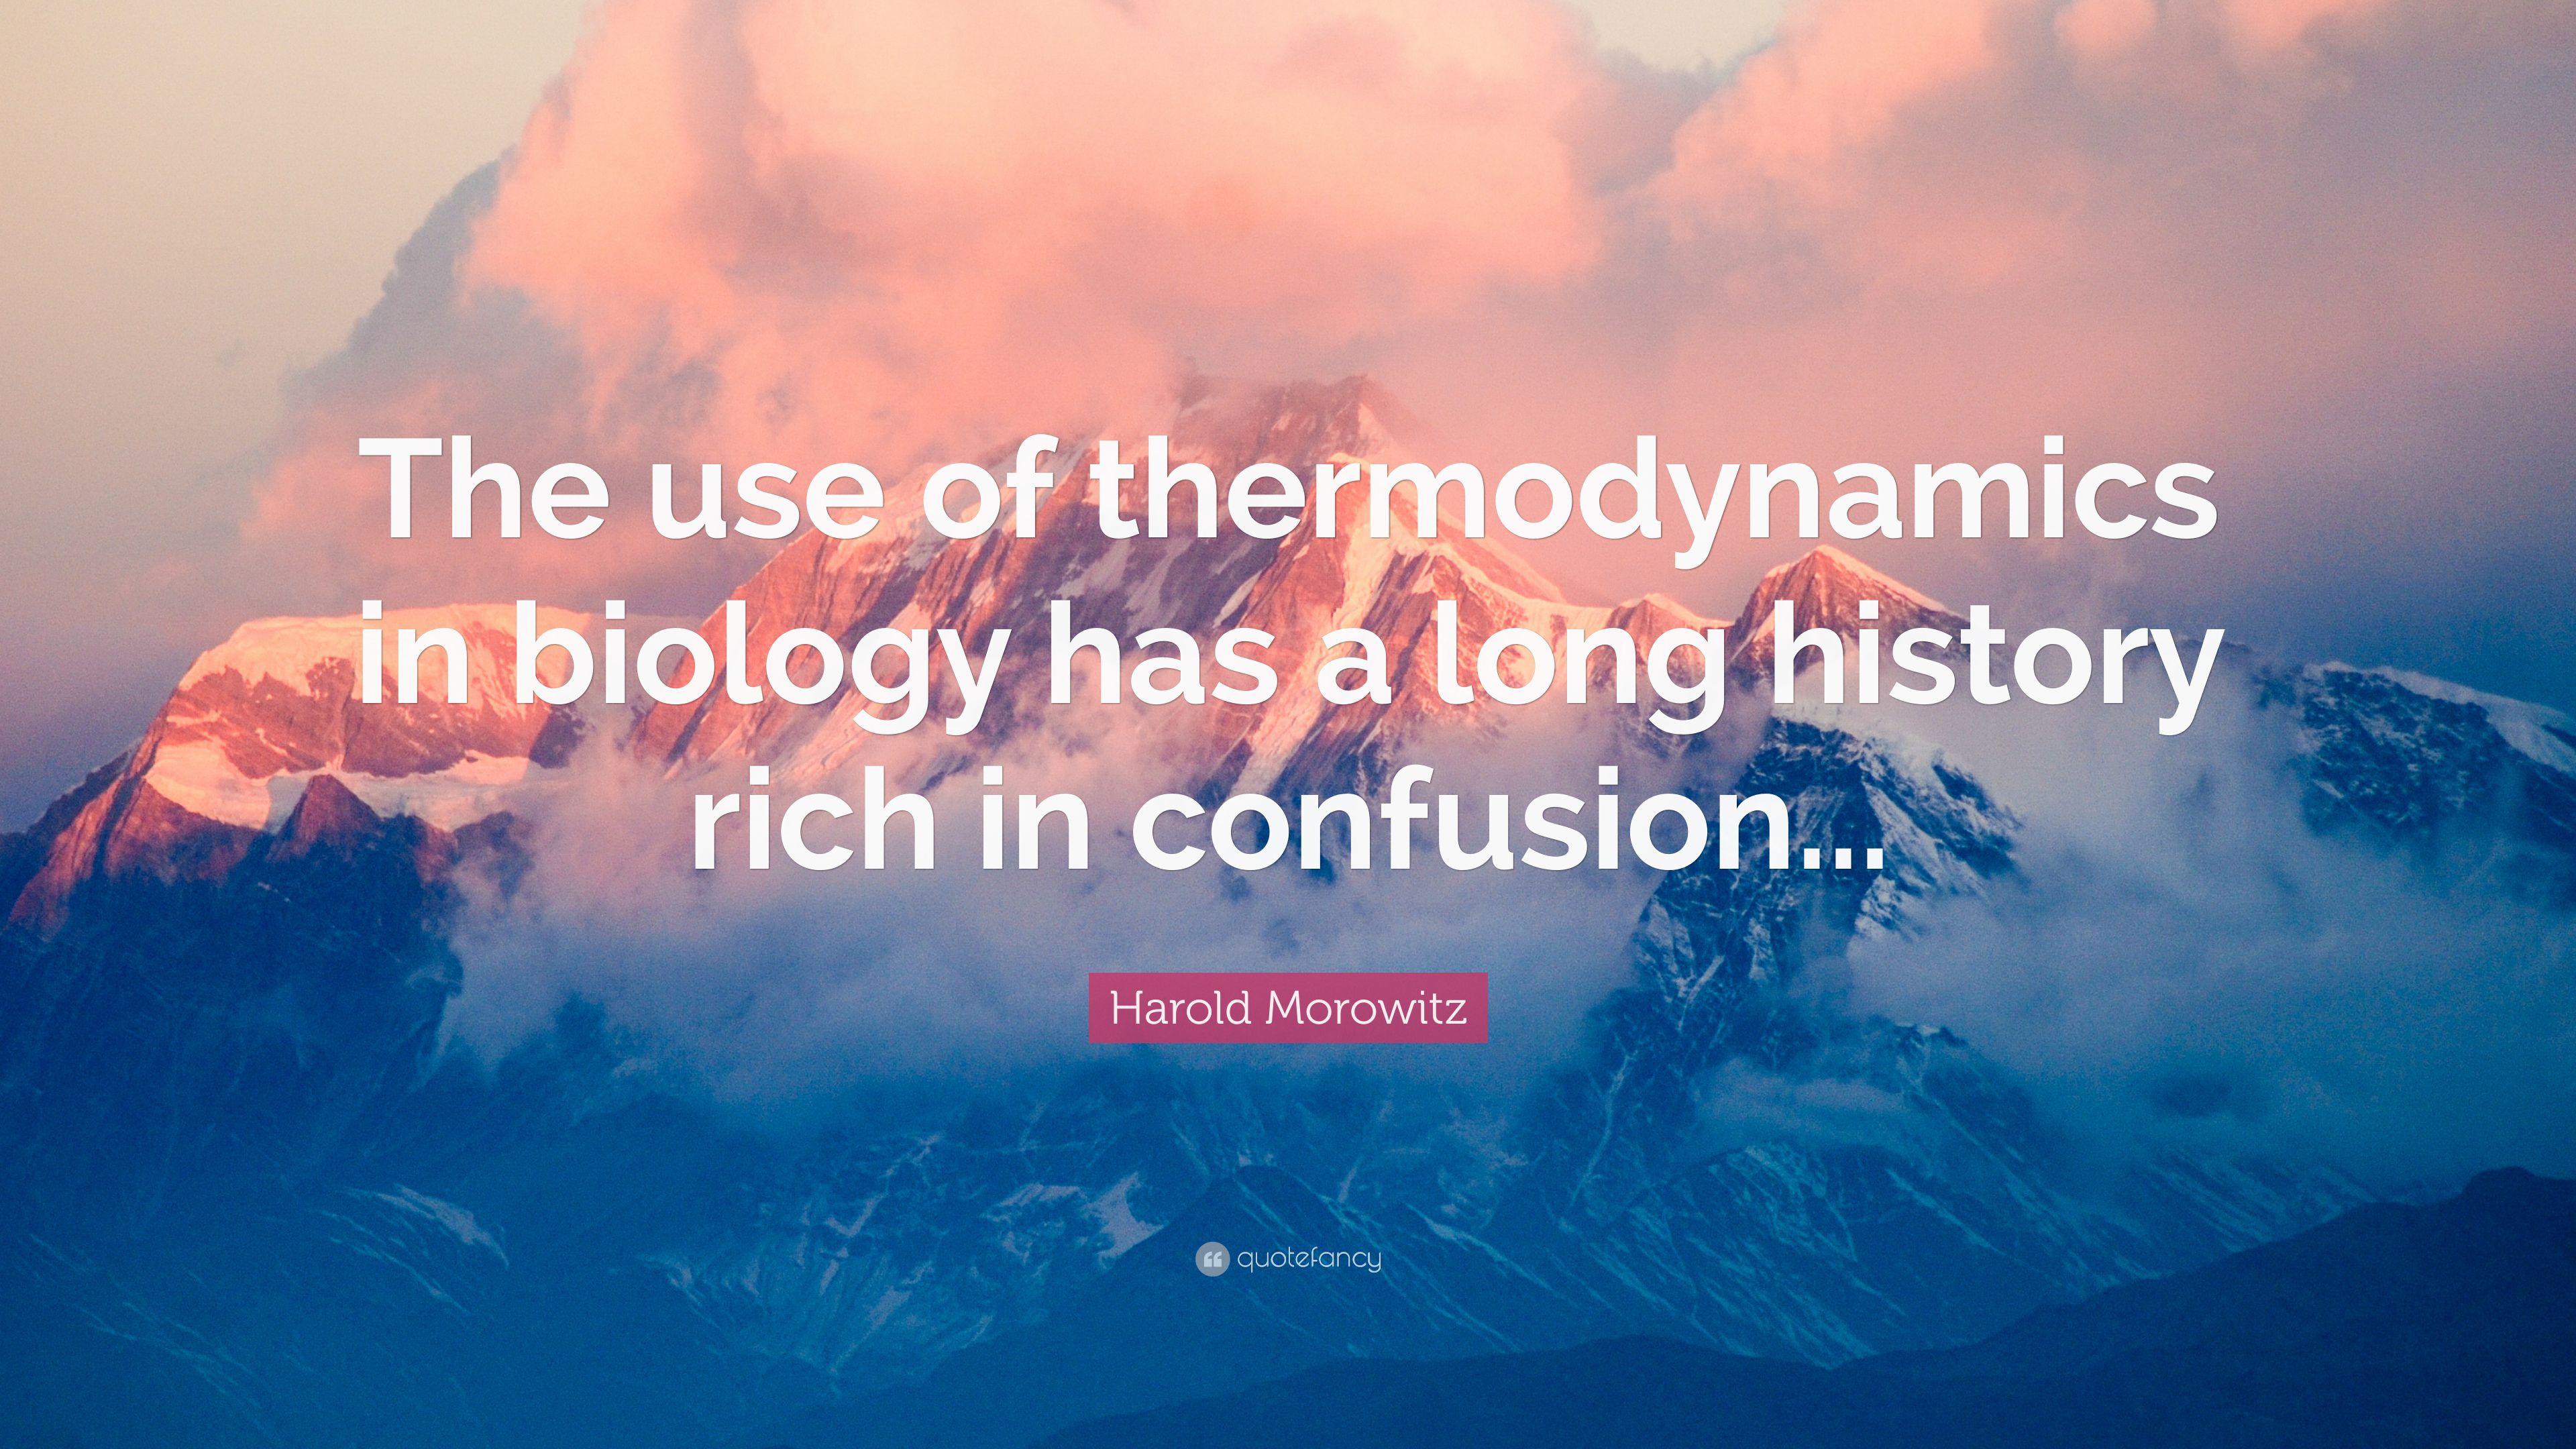 Harold Morowitz Quote: “The use of thermodynamics in biology has a long history rich in confusion.”